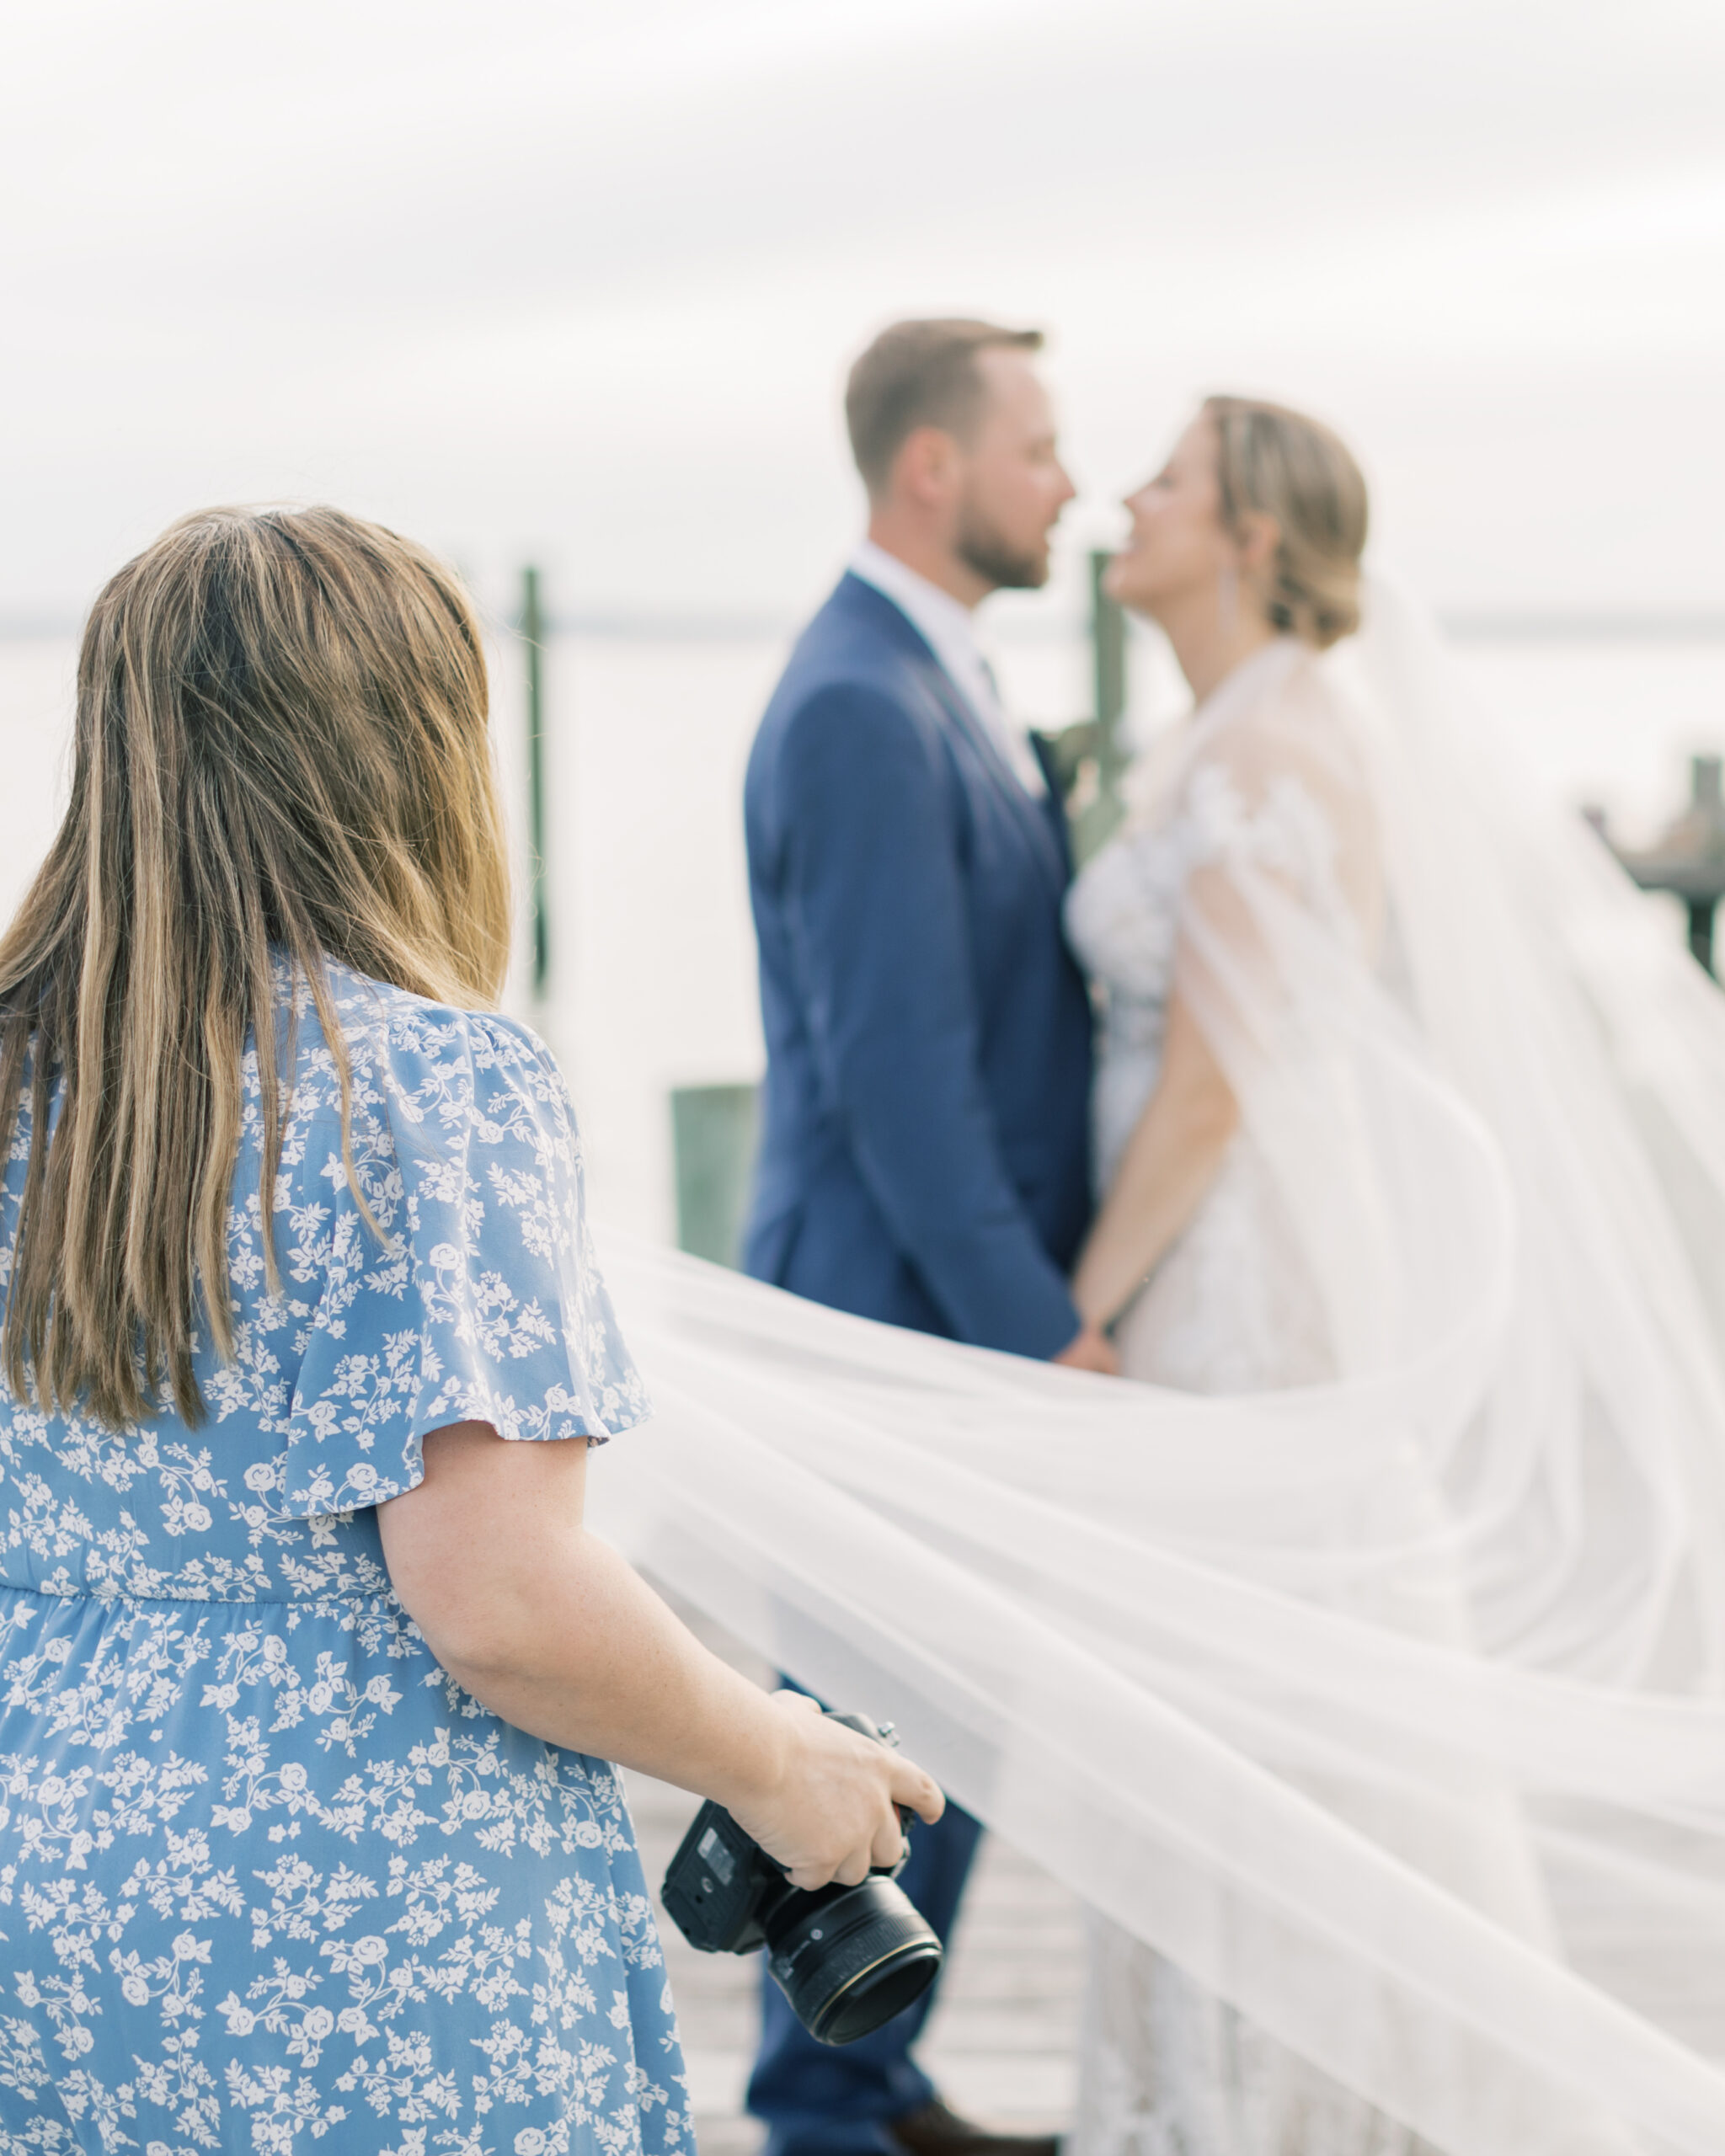 Amanda Wose stands behind a man and woman on their wedding day